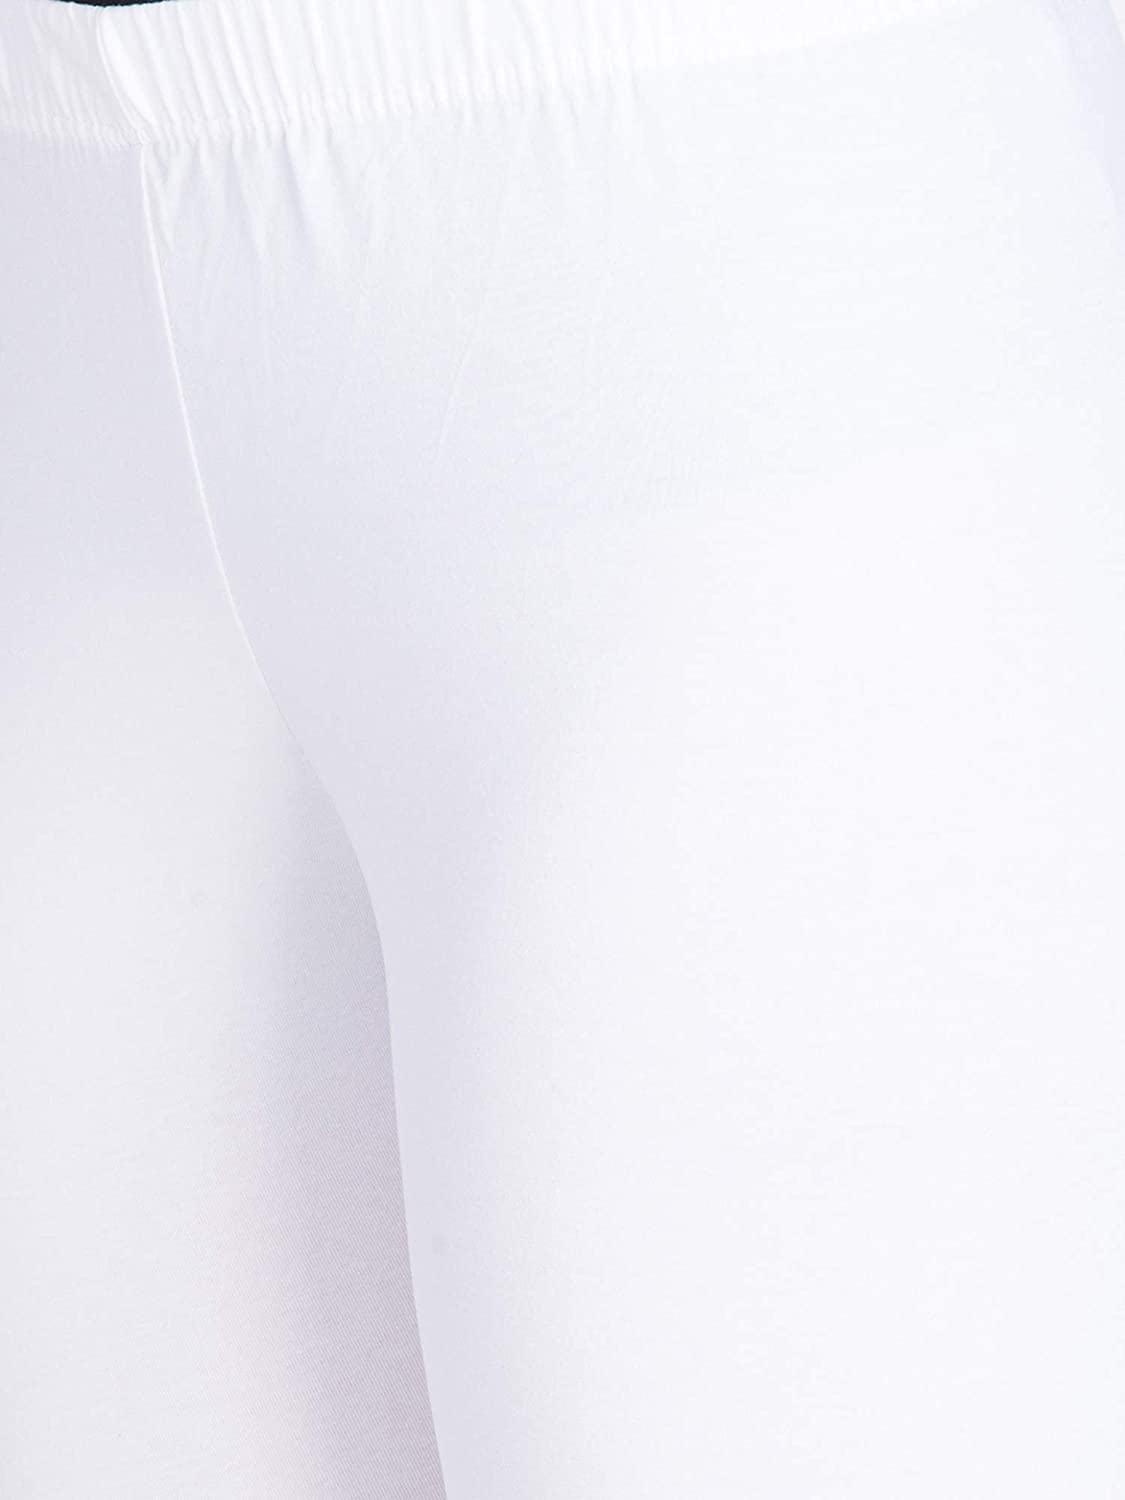 Buy Lux Lyra Ankle Length Legging L09 Off White Free Size Online at Low  Prices in India at